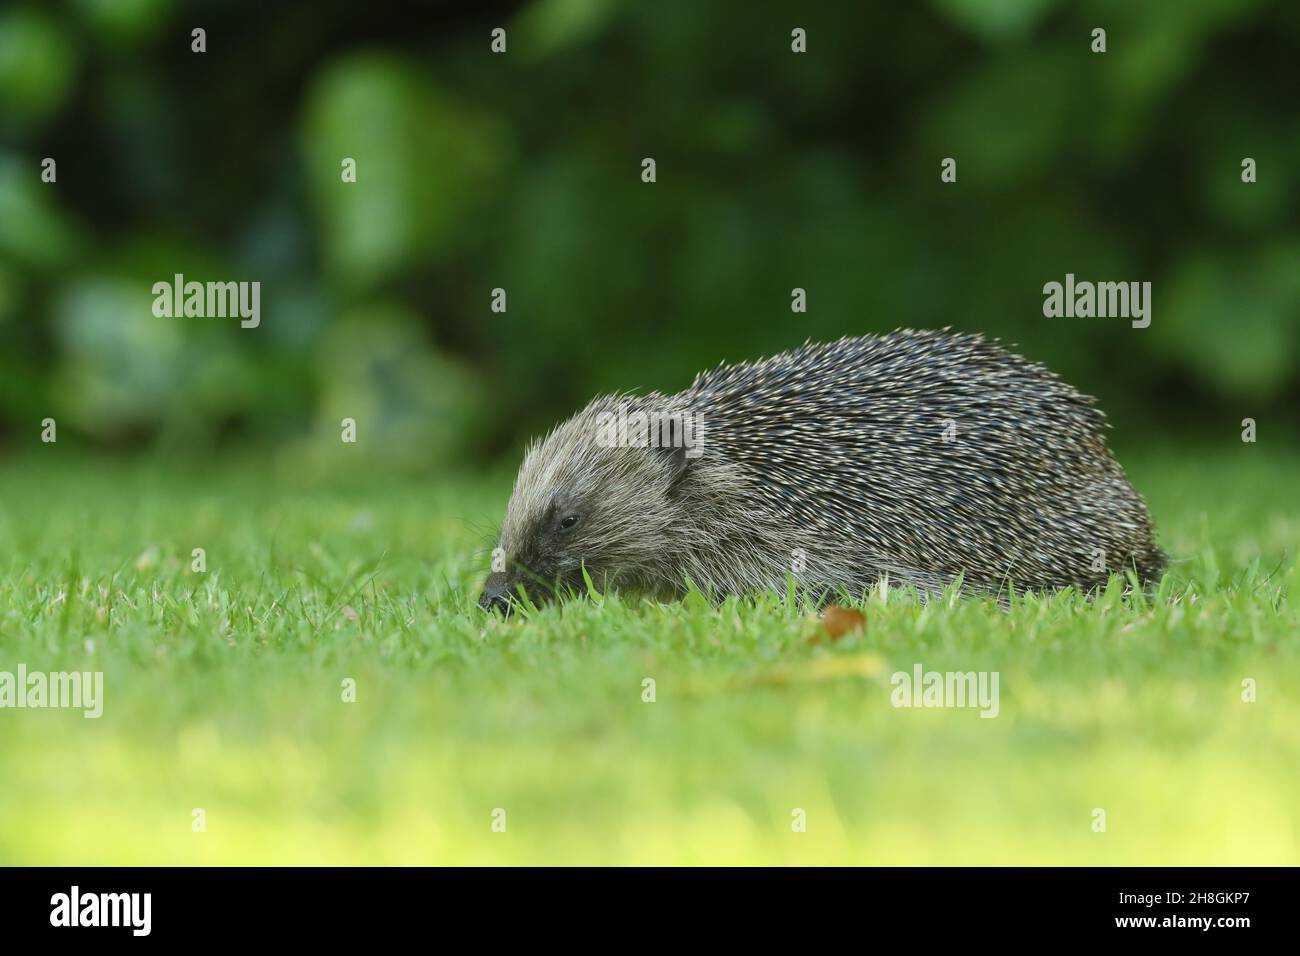 these images were captured in my garden as the hedgehog proceeded on its rounds which can be up to 2 miles.  They are very vulnerable on roads. Stock Photo